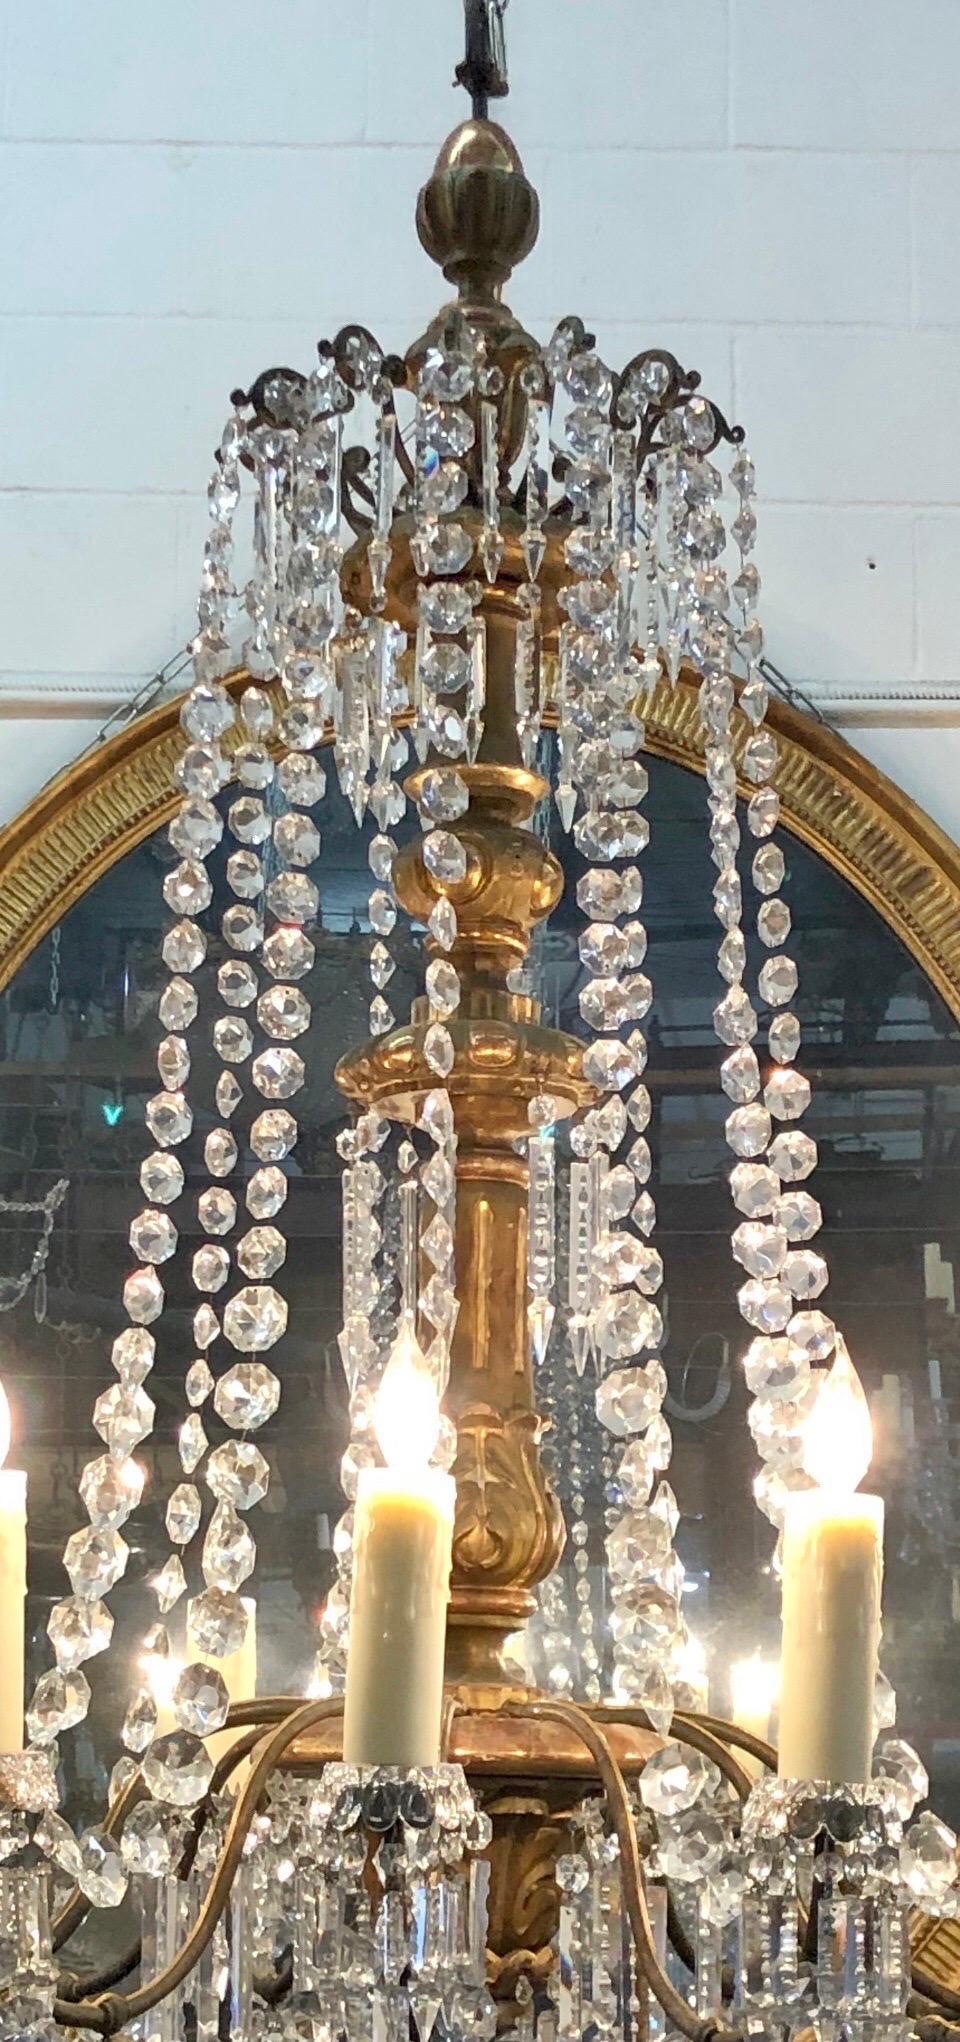 Hand-Carved 18th C. Italian Giltwood, Bronzed Lacquer & Crystal Louis XVI Period Chandelier For Sale